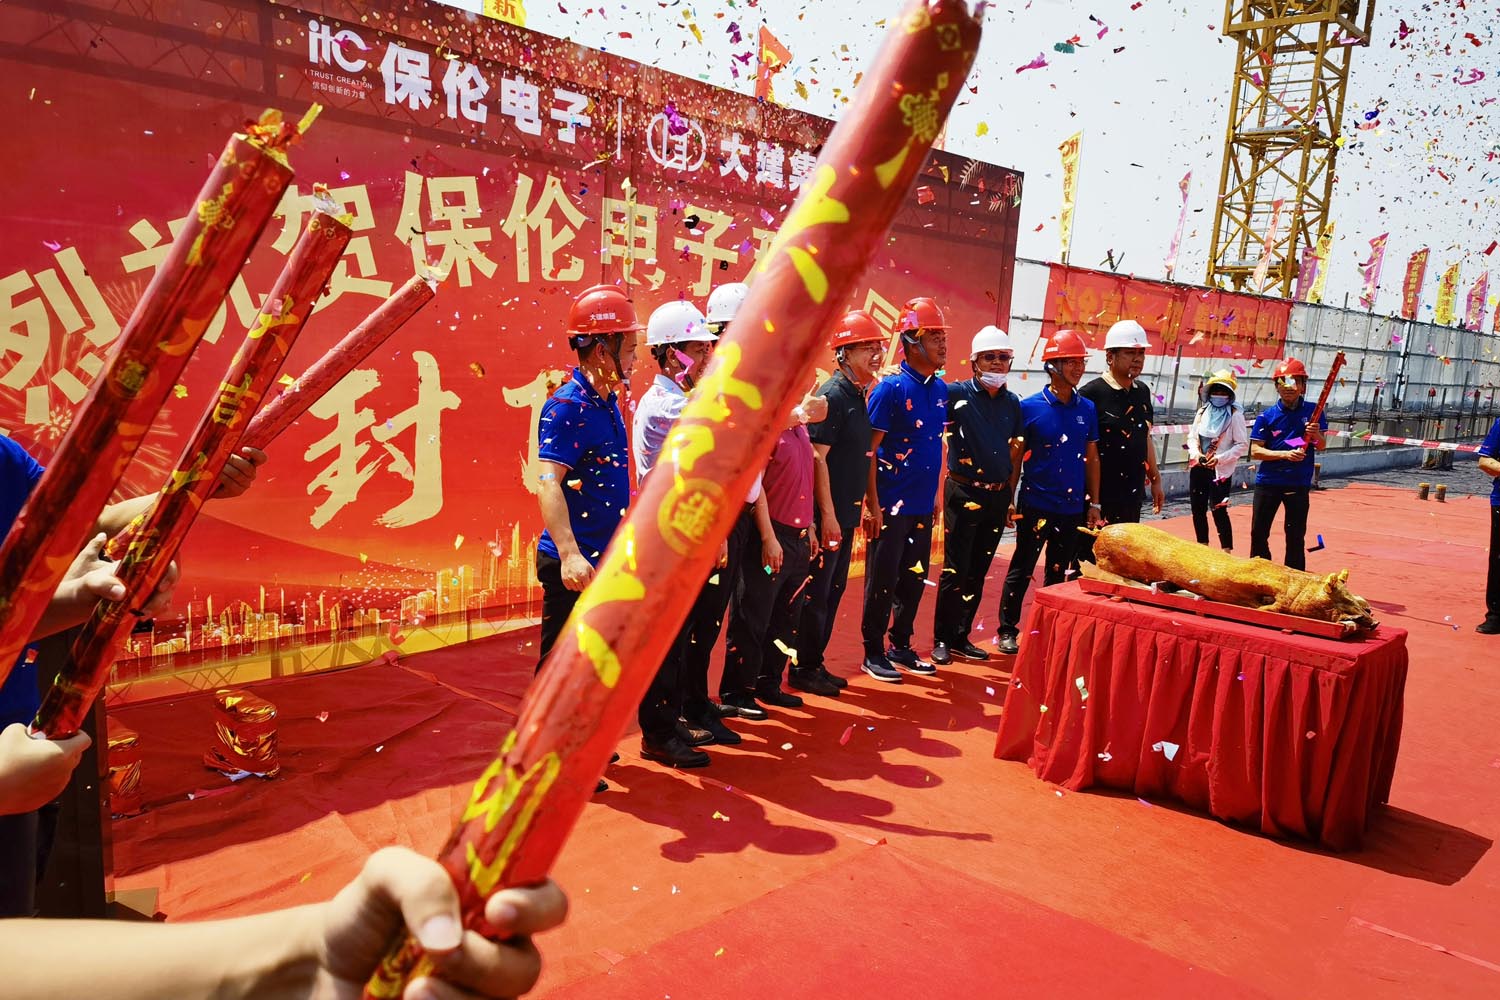 The Science and Technology Industrial Park project by Guangzhou Baolun Electronics Co., Ltd. (itc) met expectations and brought about a great topping-out! The itc Science and Technology Industrial Park's topping-out ceremony took place on the morning of September 25. 